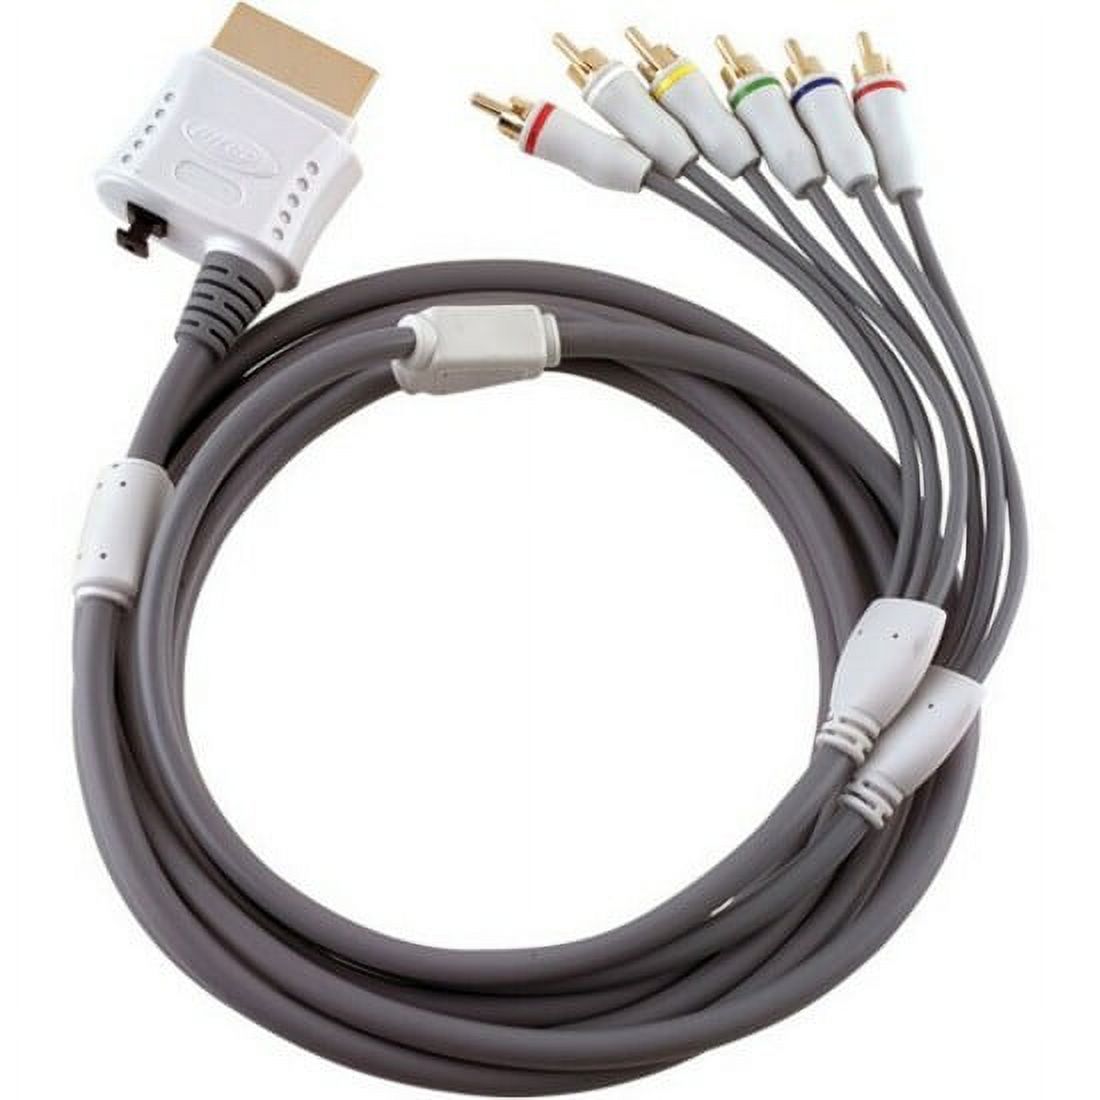 Intec Component HD AV Cable - image 1 of 2